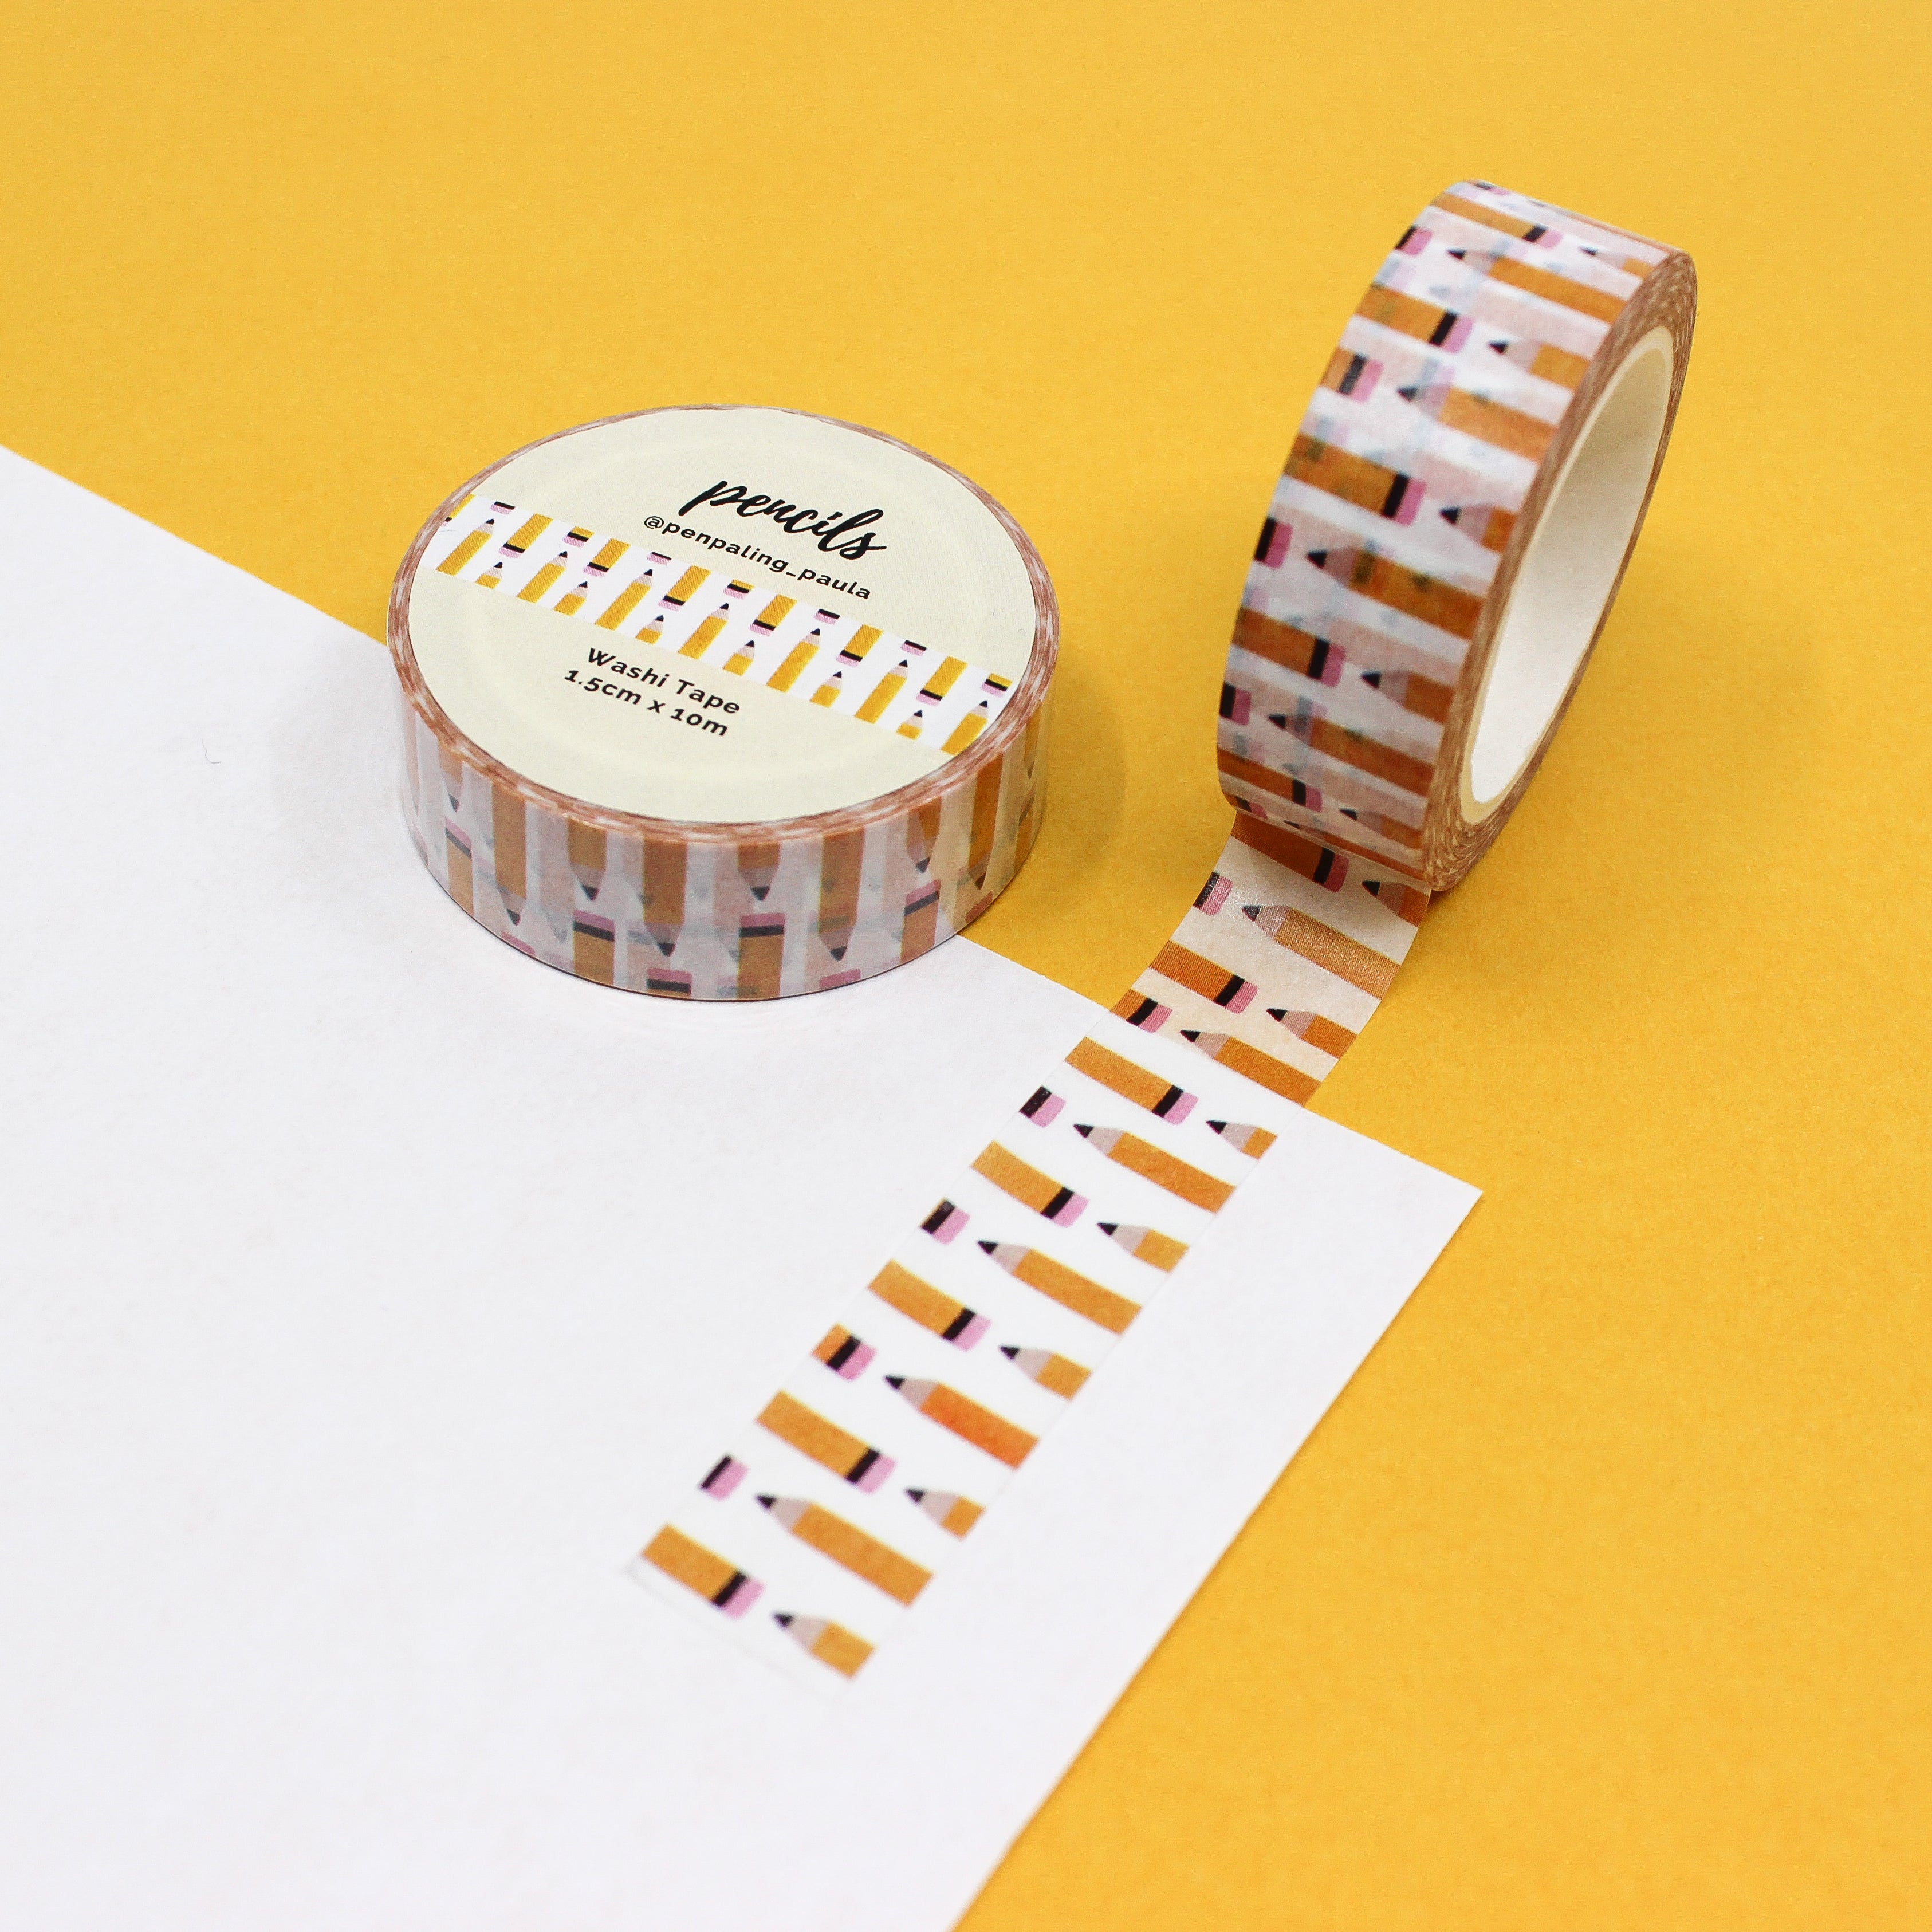 This is a yellow pencil themed washi tape from BBB Supplies Craft Shop